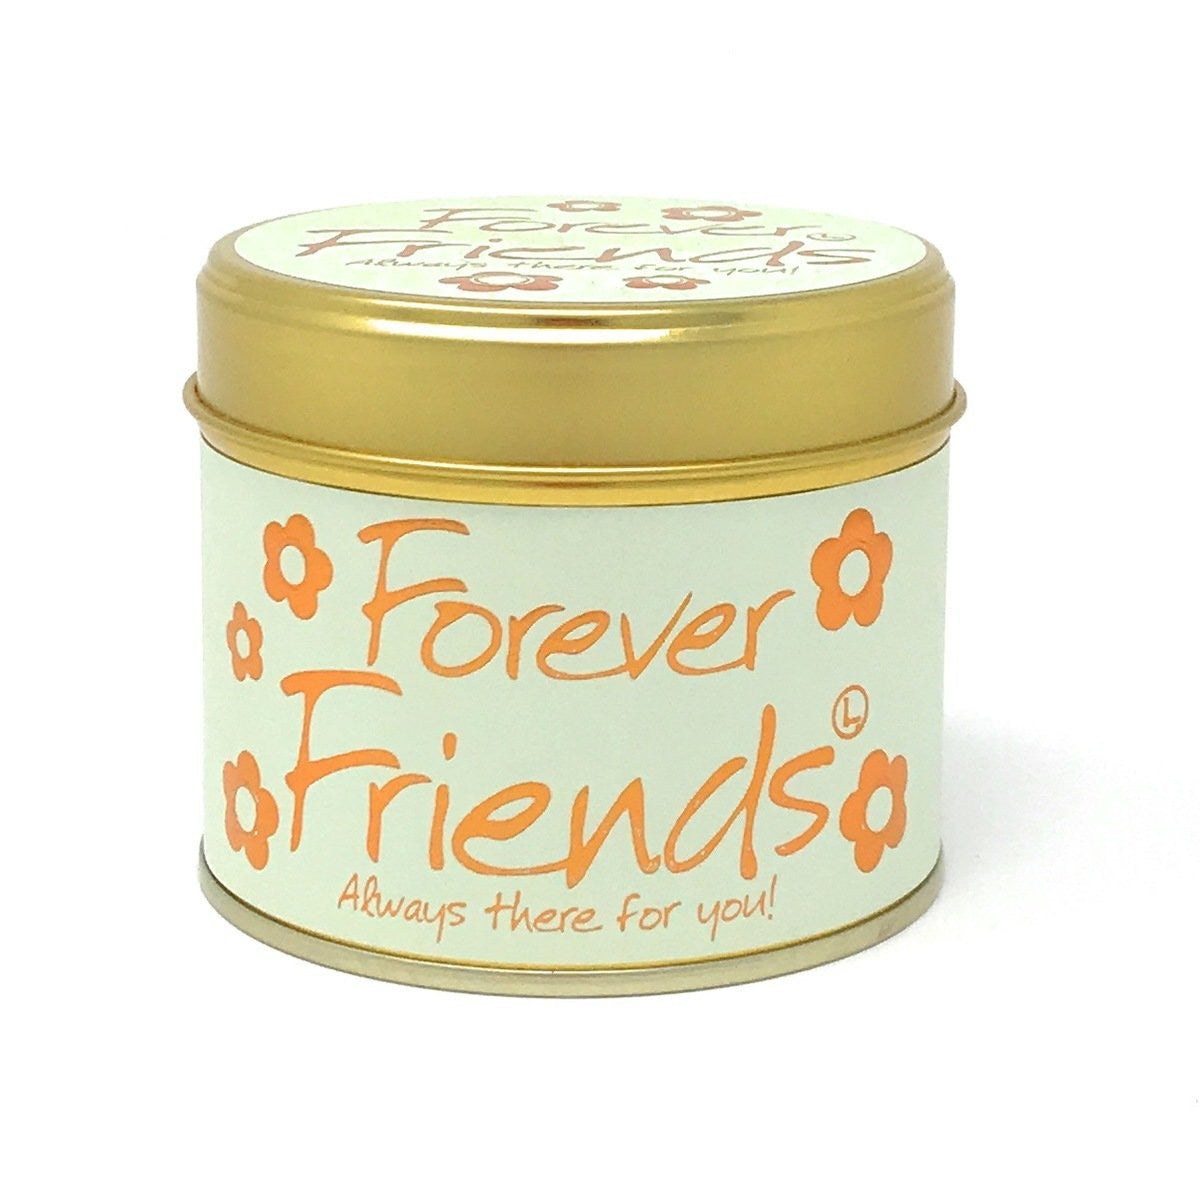 Forever Friends Scented Candle from Lily-Flame. Handmade in England